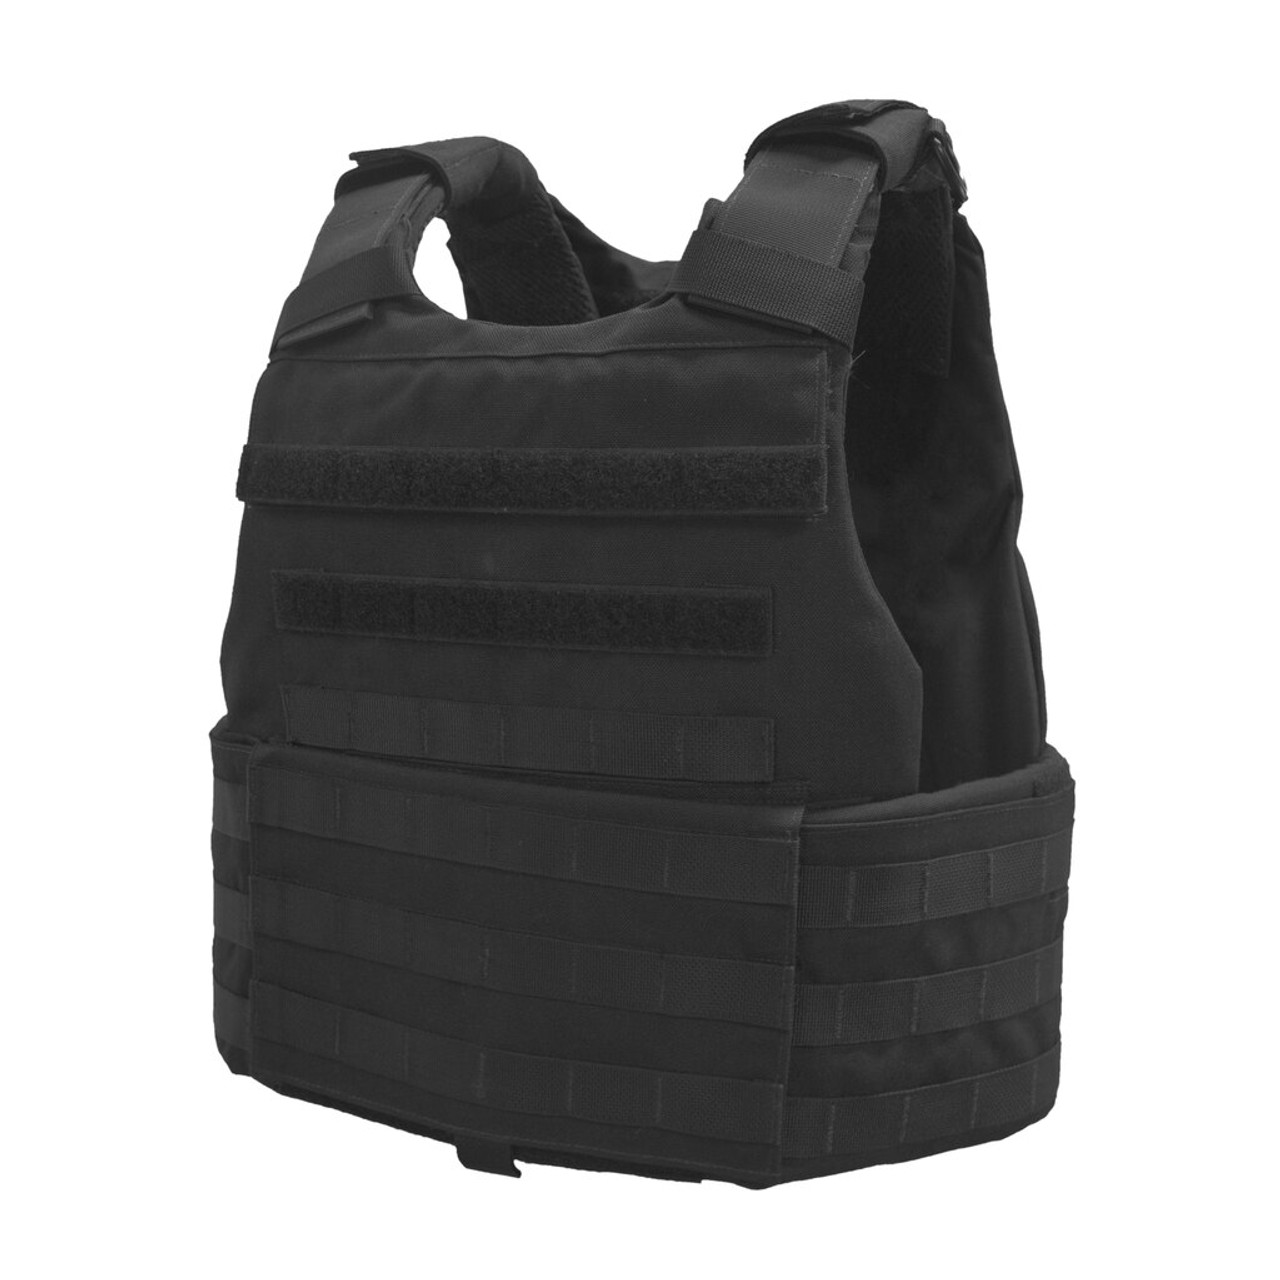 Trooper APC Bullet Proof Plate Carrier - 6 Colors | Live Action Safety